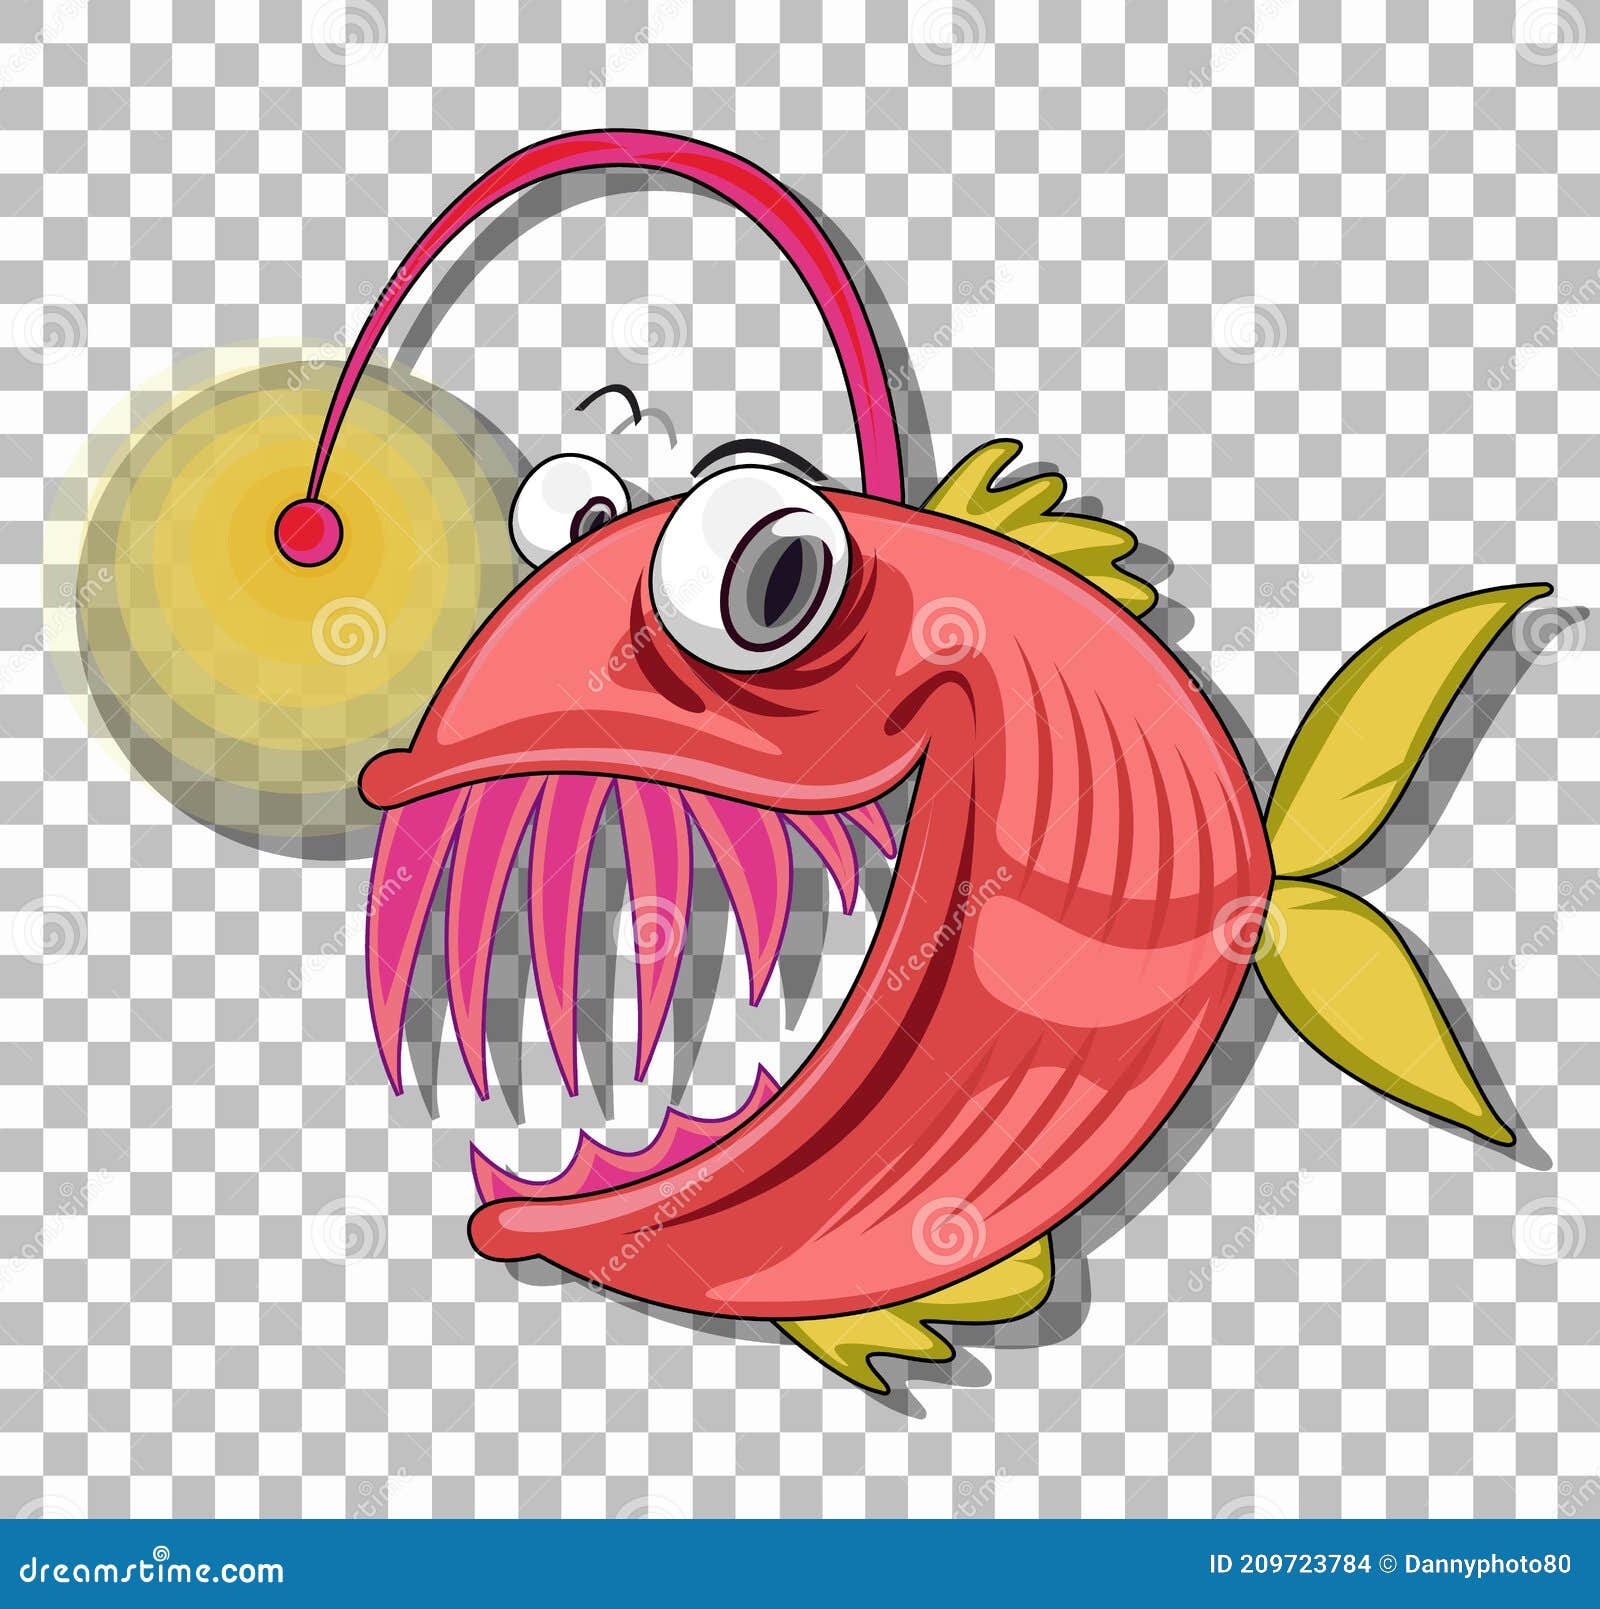 Angler Fish Cartoon Character Isolated on Transparent Background Stock  Vector - Illustration of character, animals: 209723784